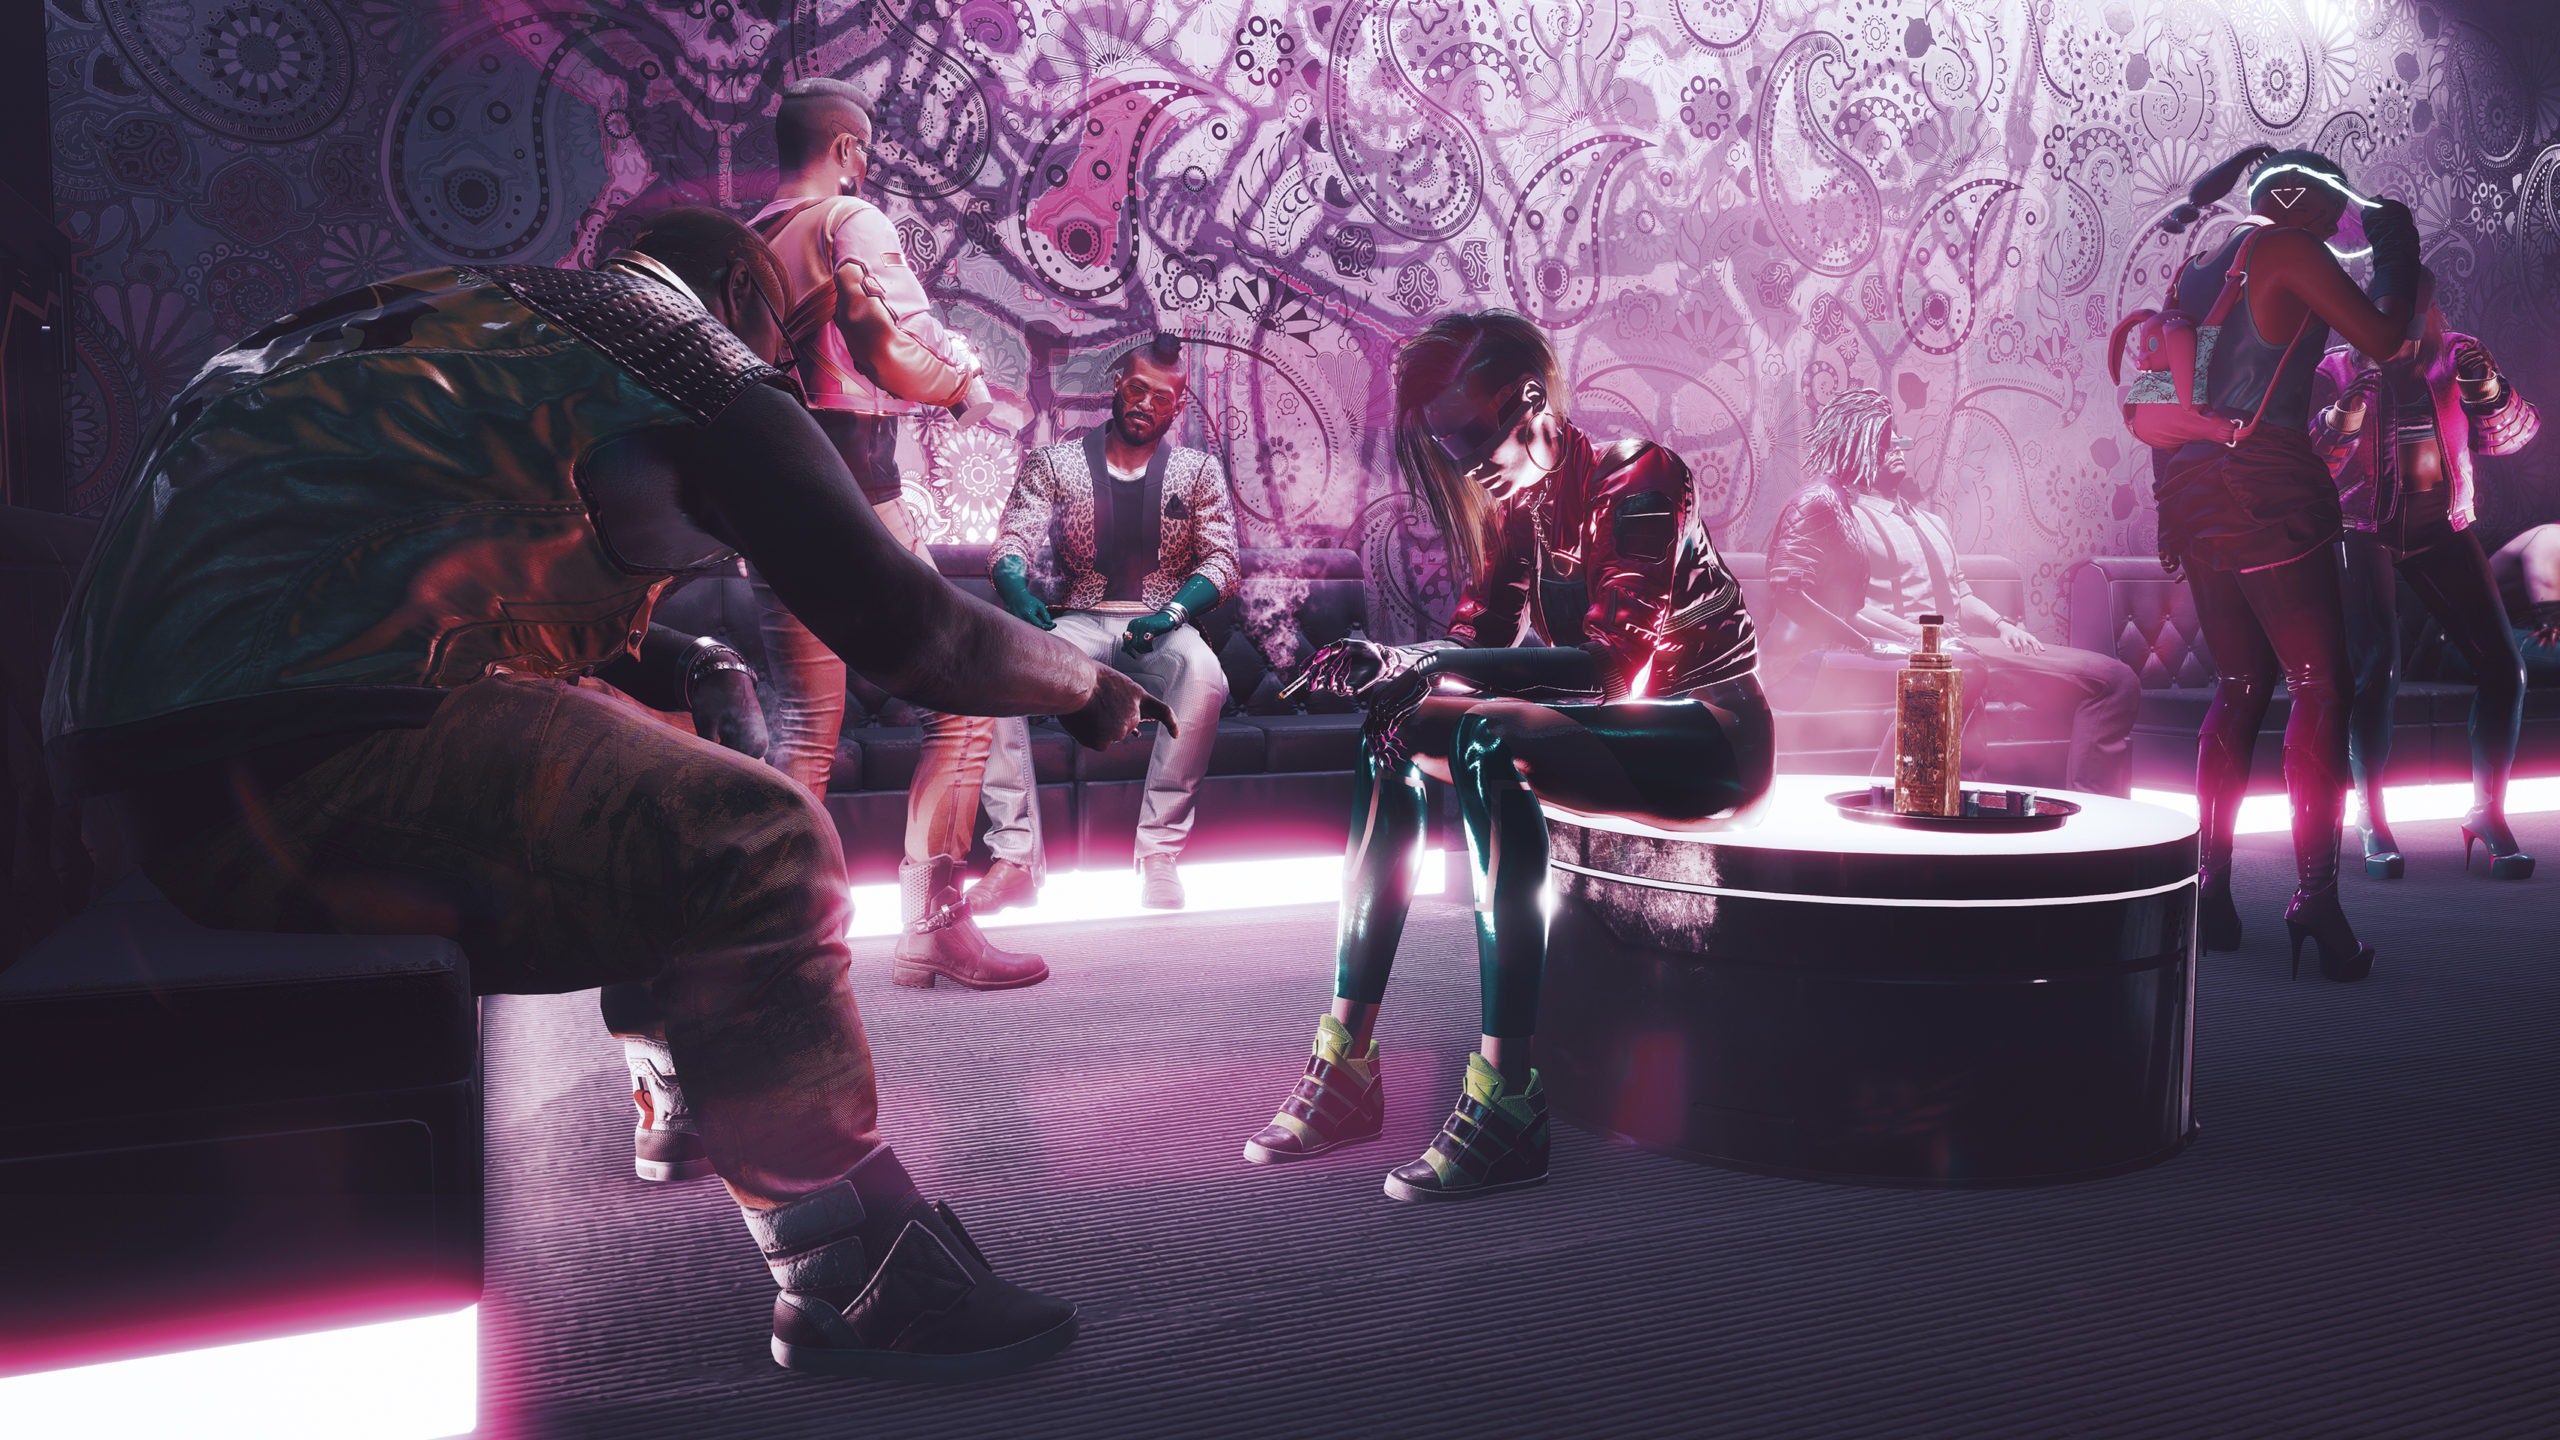 Cyberpunk 2077 Might Be Buggy, But It Has A Great Photomode